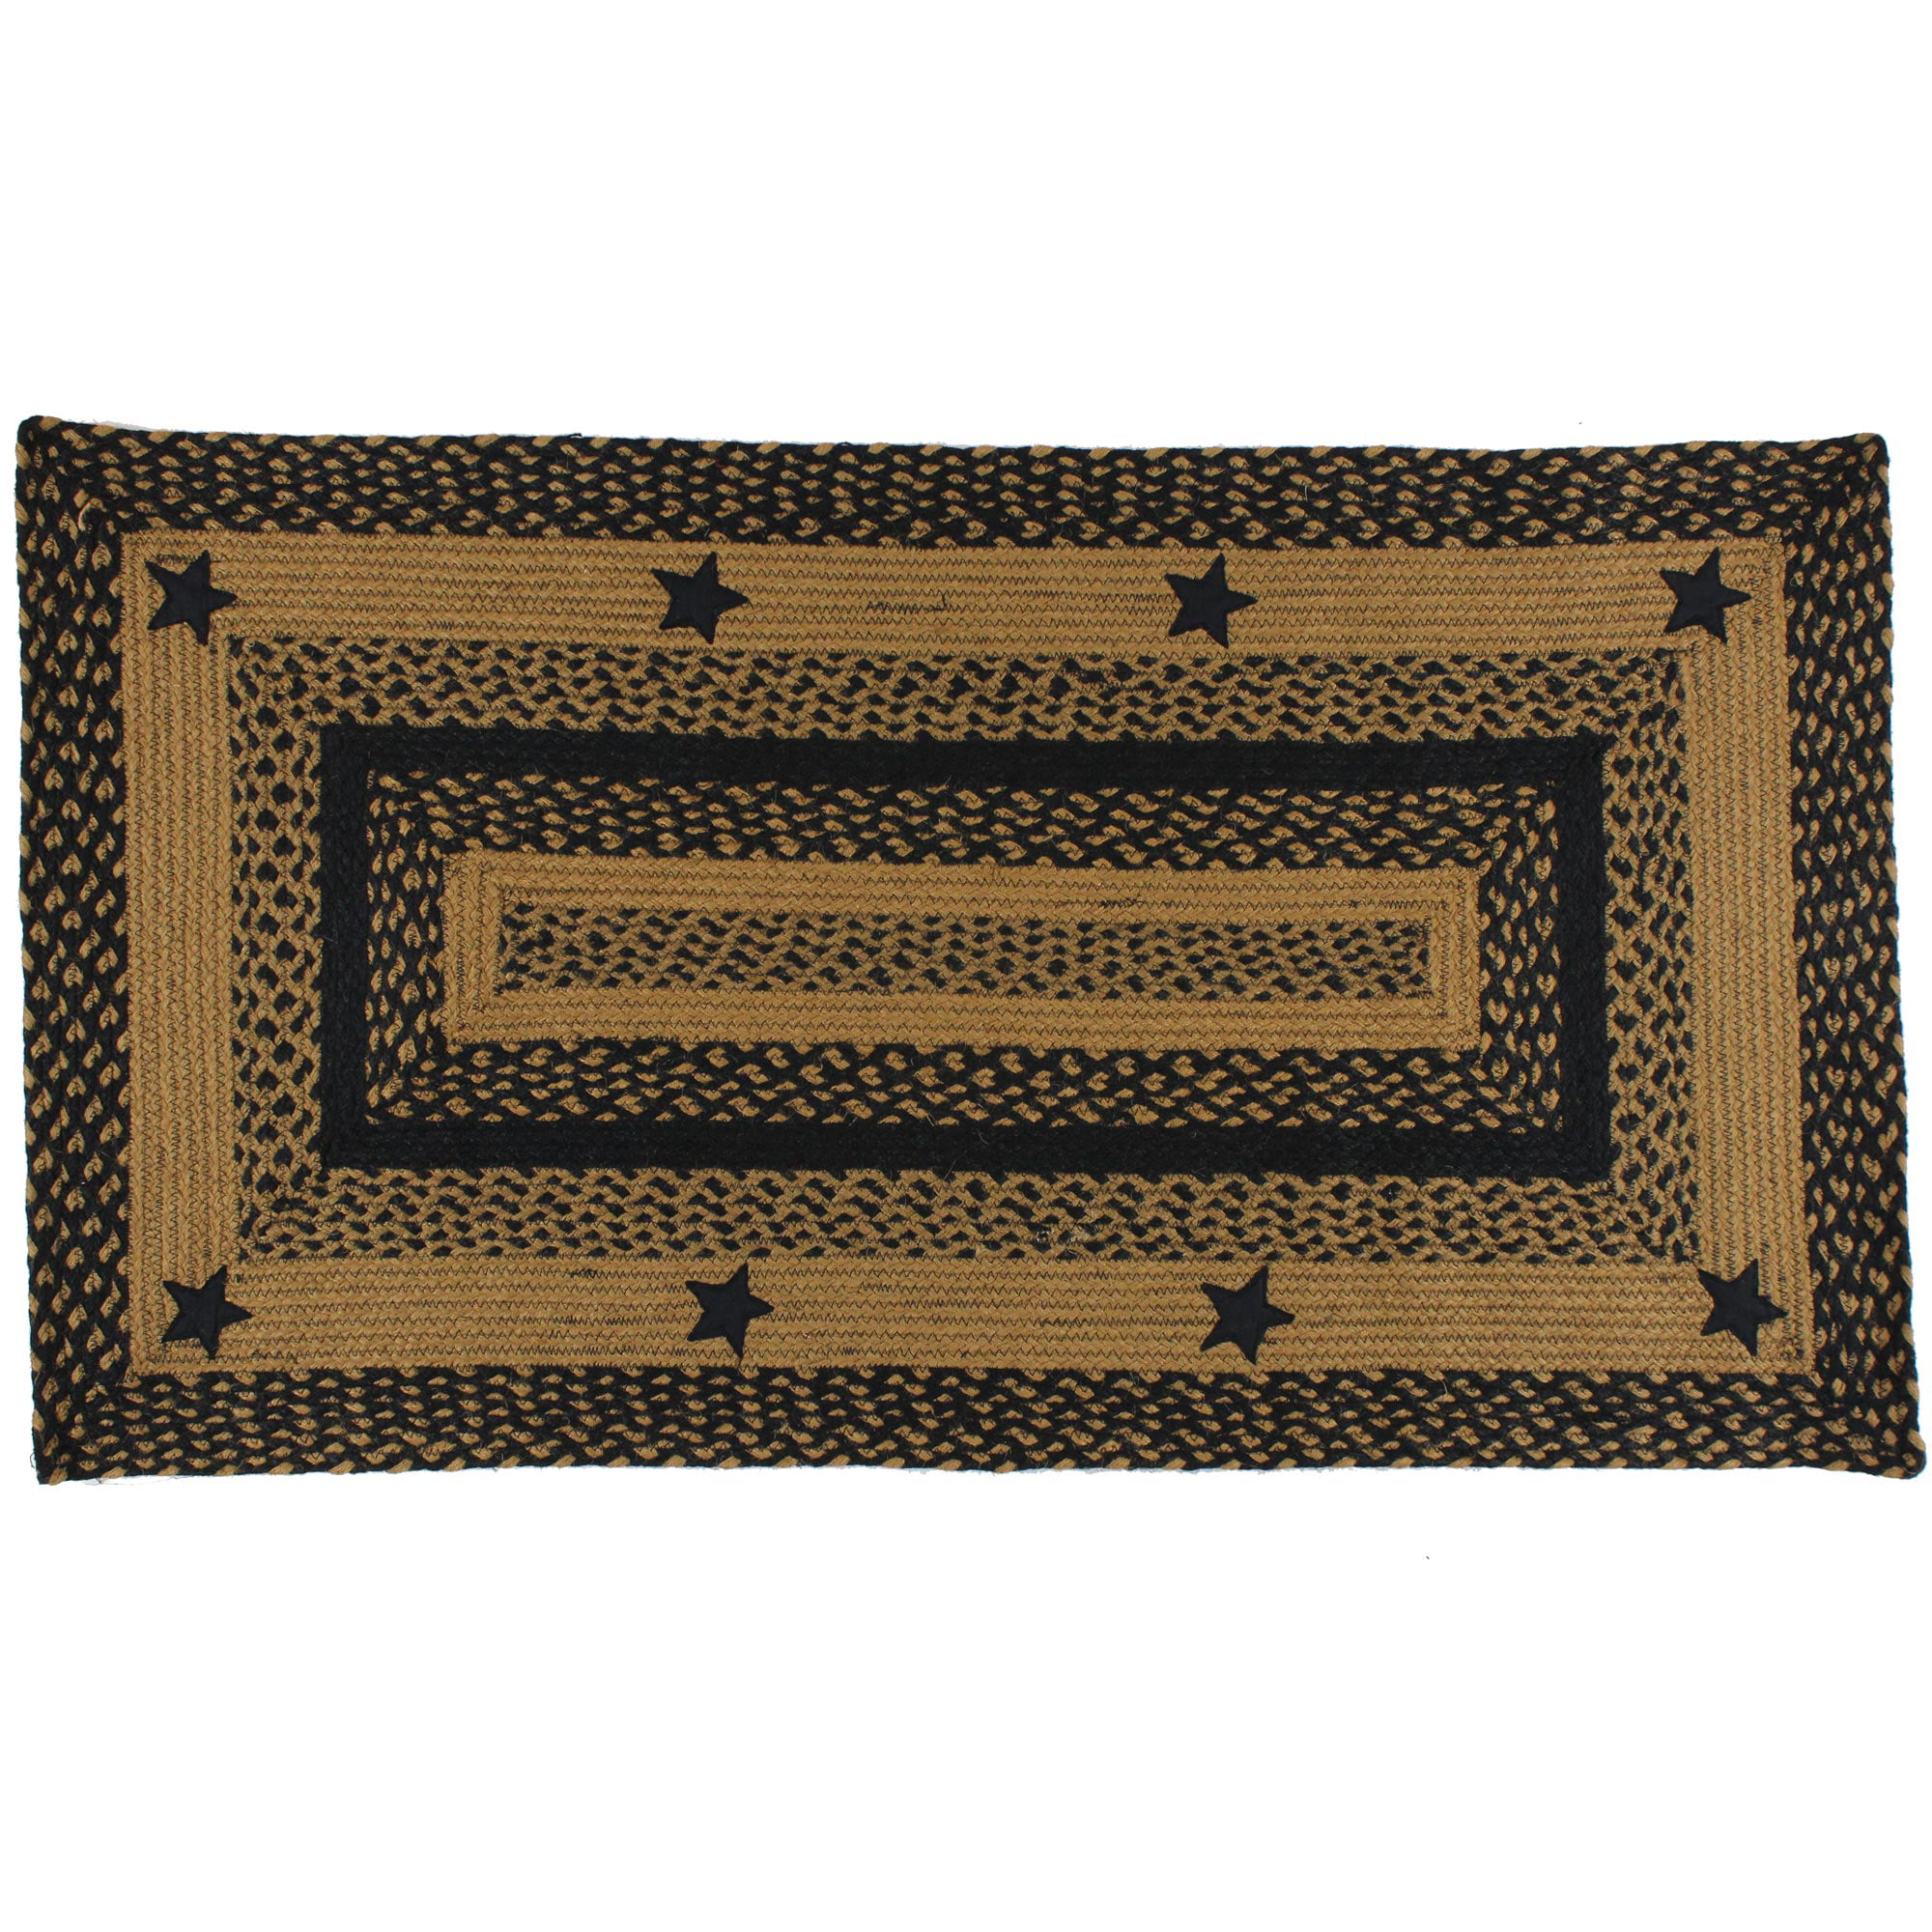 New Primitive Country Kitchen Oval Jute BRAIDED BLACK STAR RUG 27" x 48" 